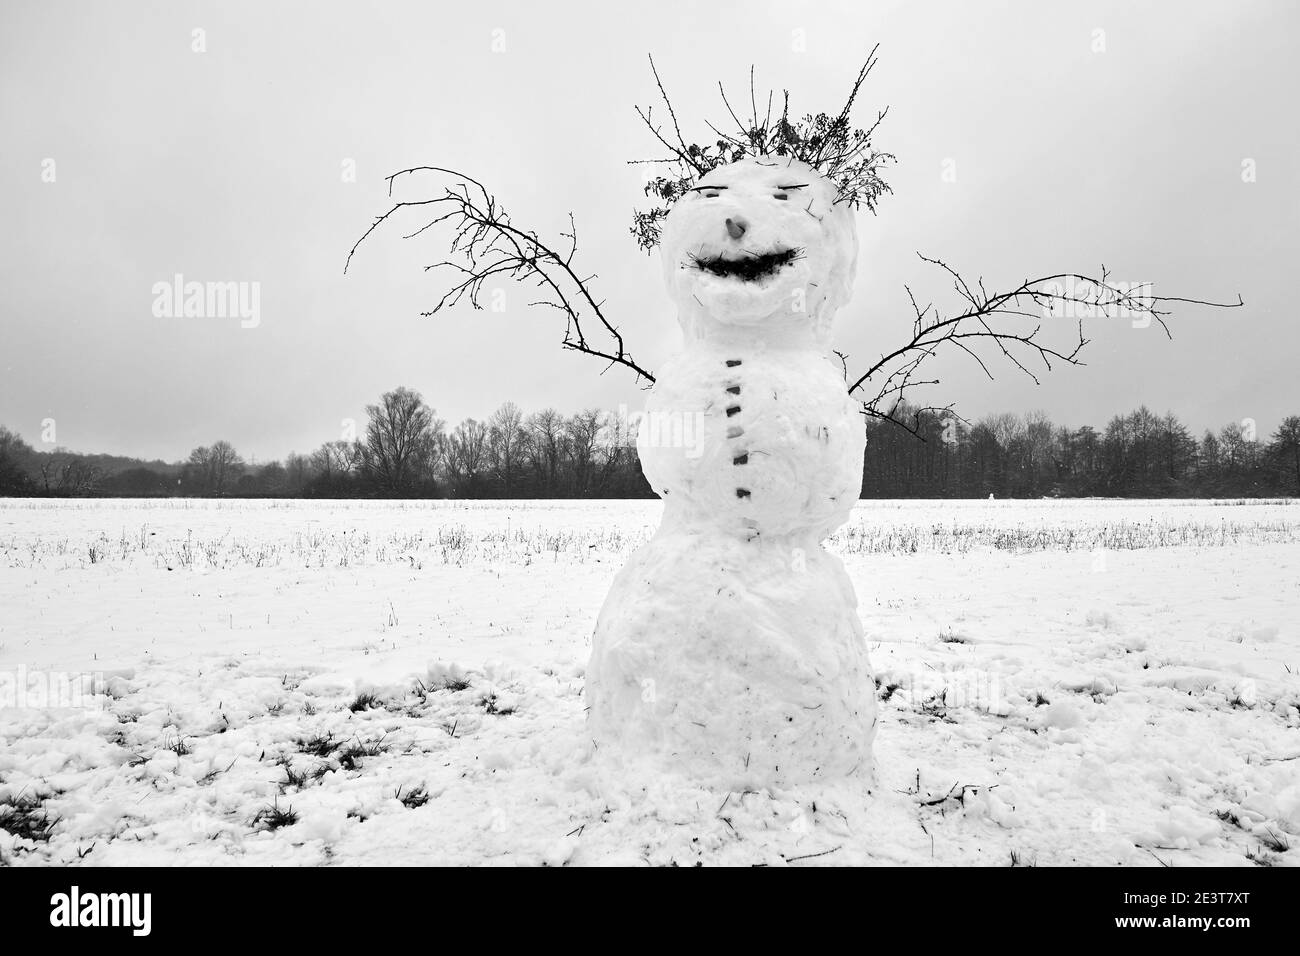 Funny snowman on snowy field with open arms and hat made of twigs Stock Photo